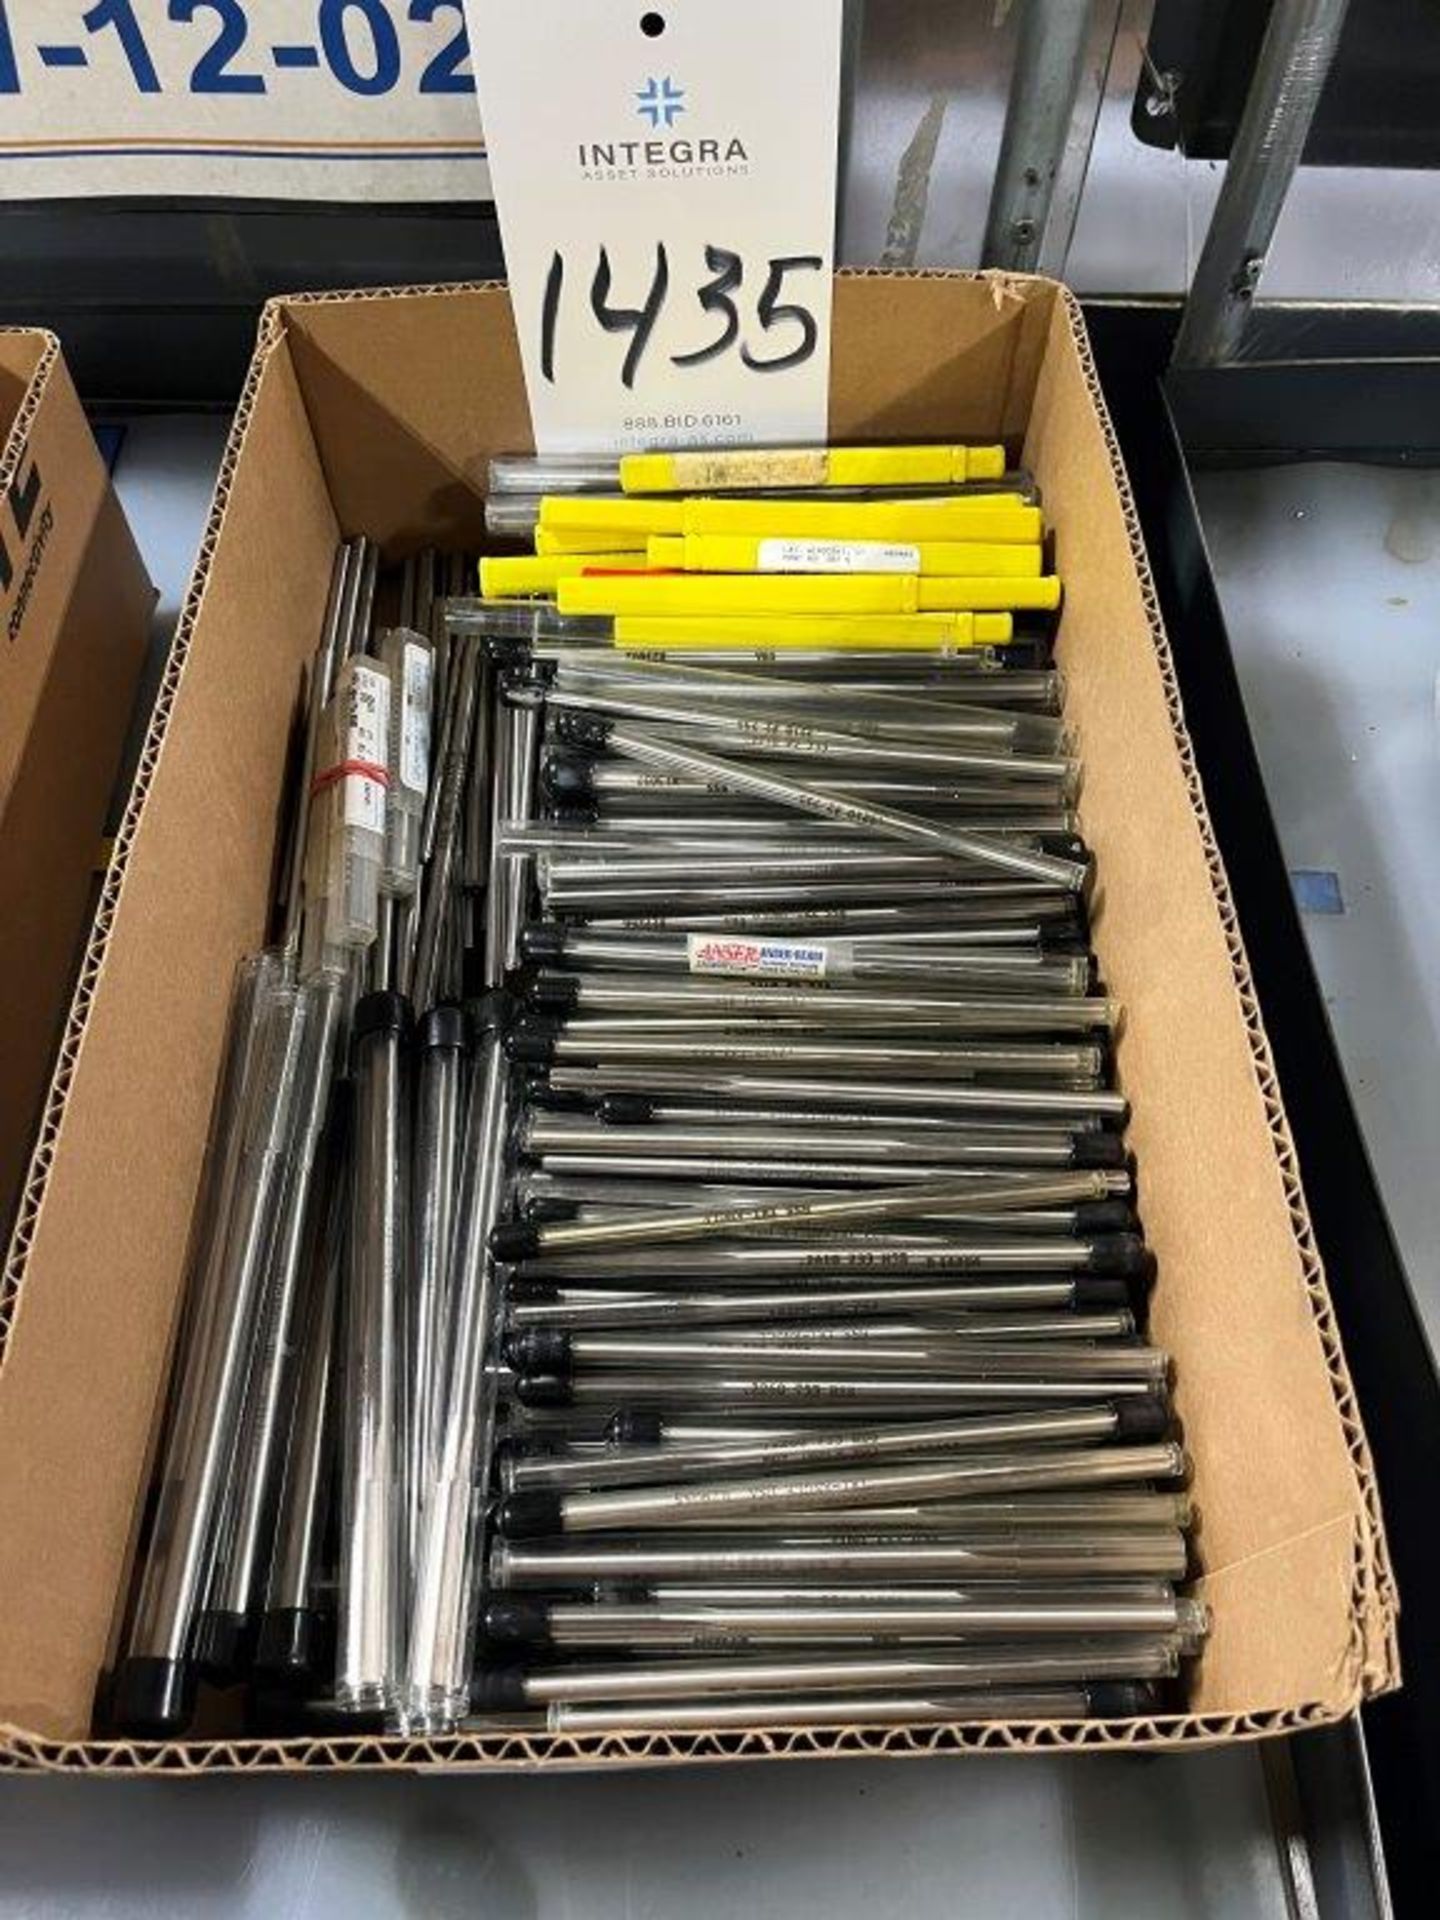 Lot of Assorted Reamers